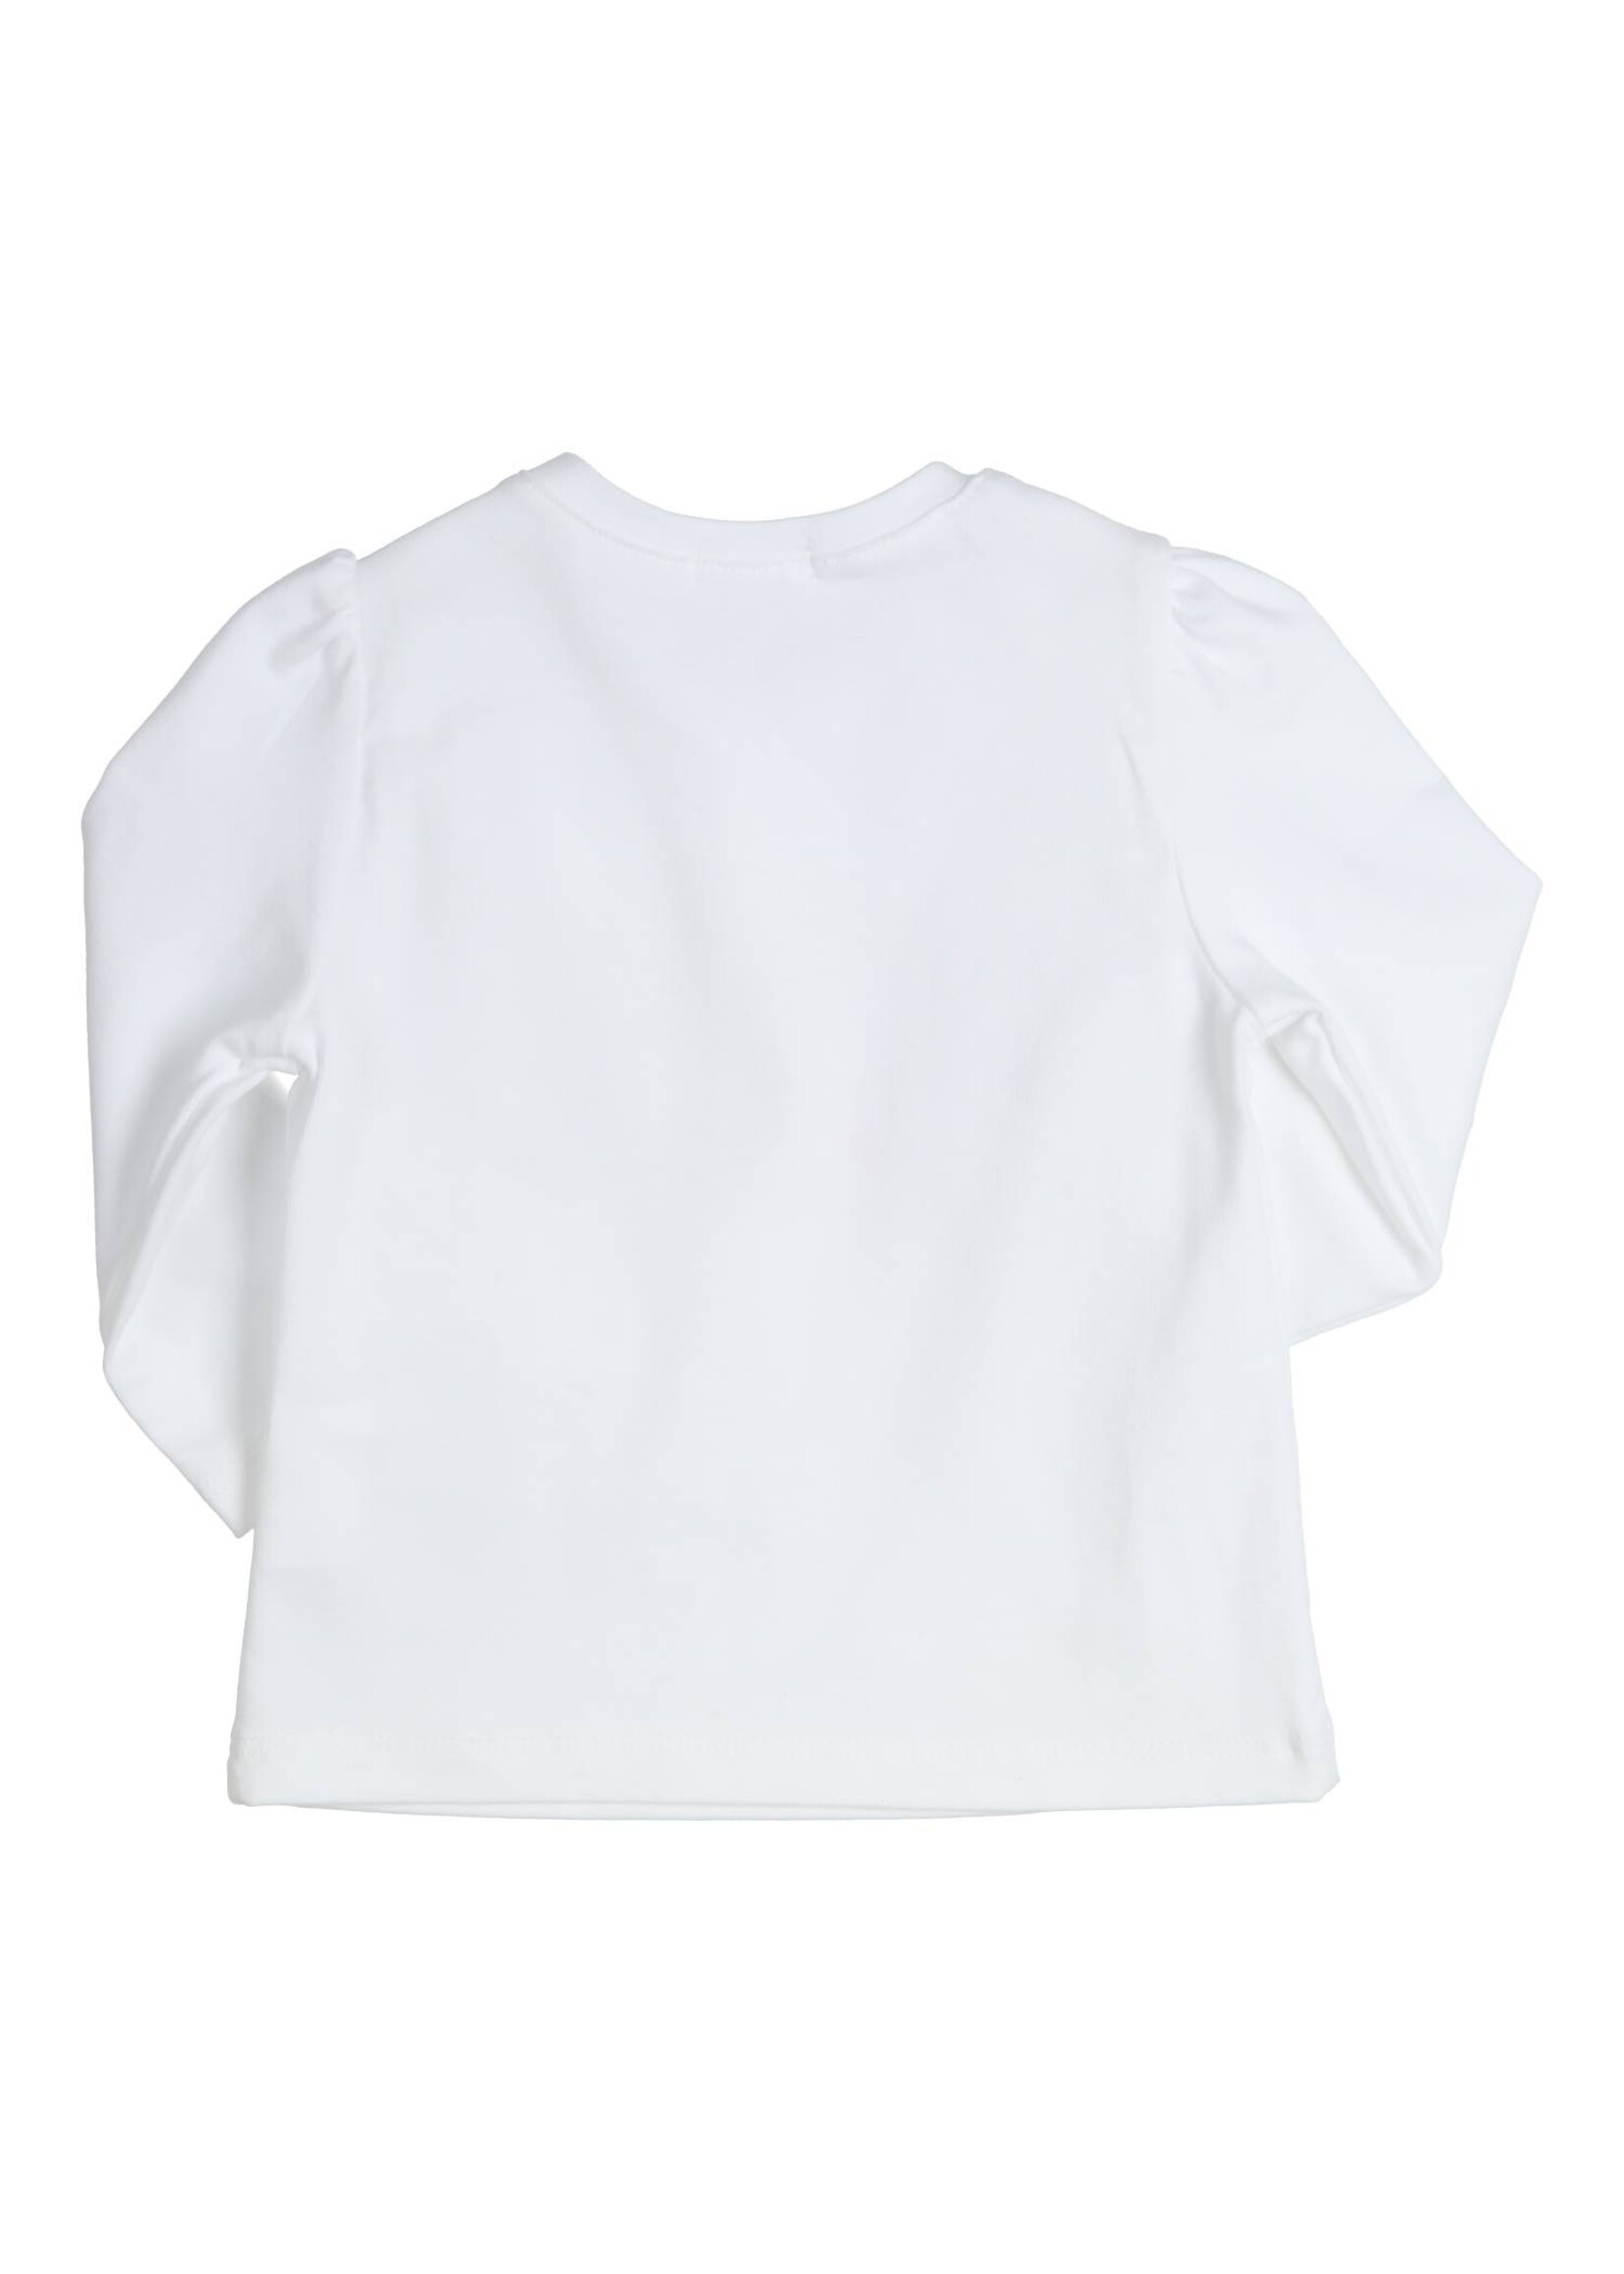 Gymp Girls Longsleeve Aerobic Yay for today 352-4259-10 White